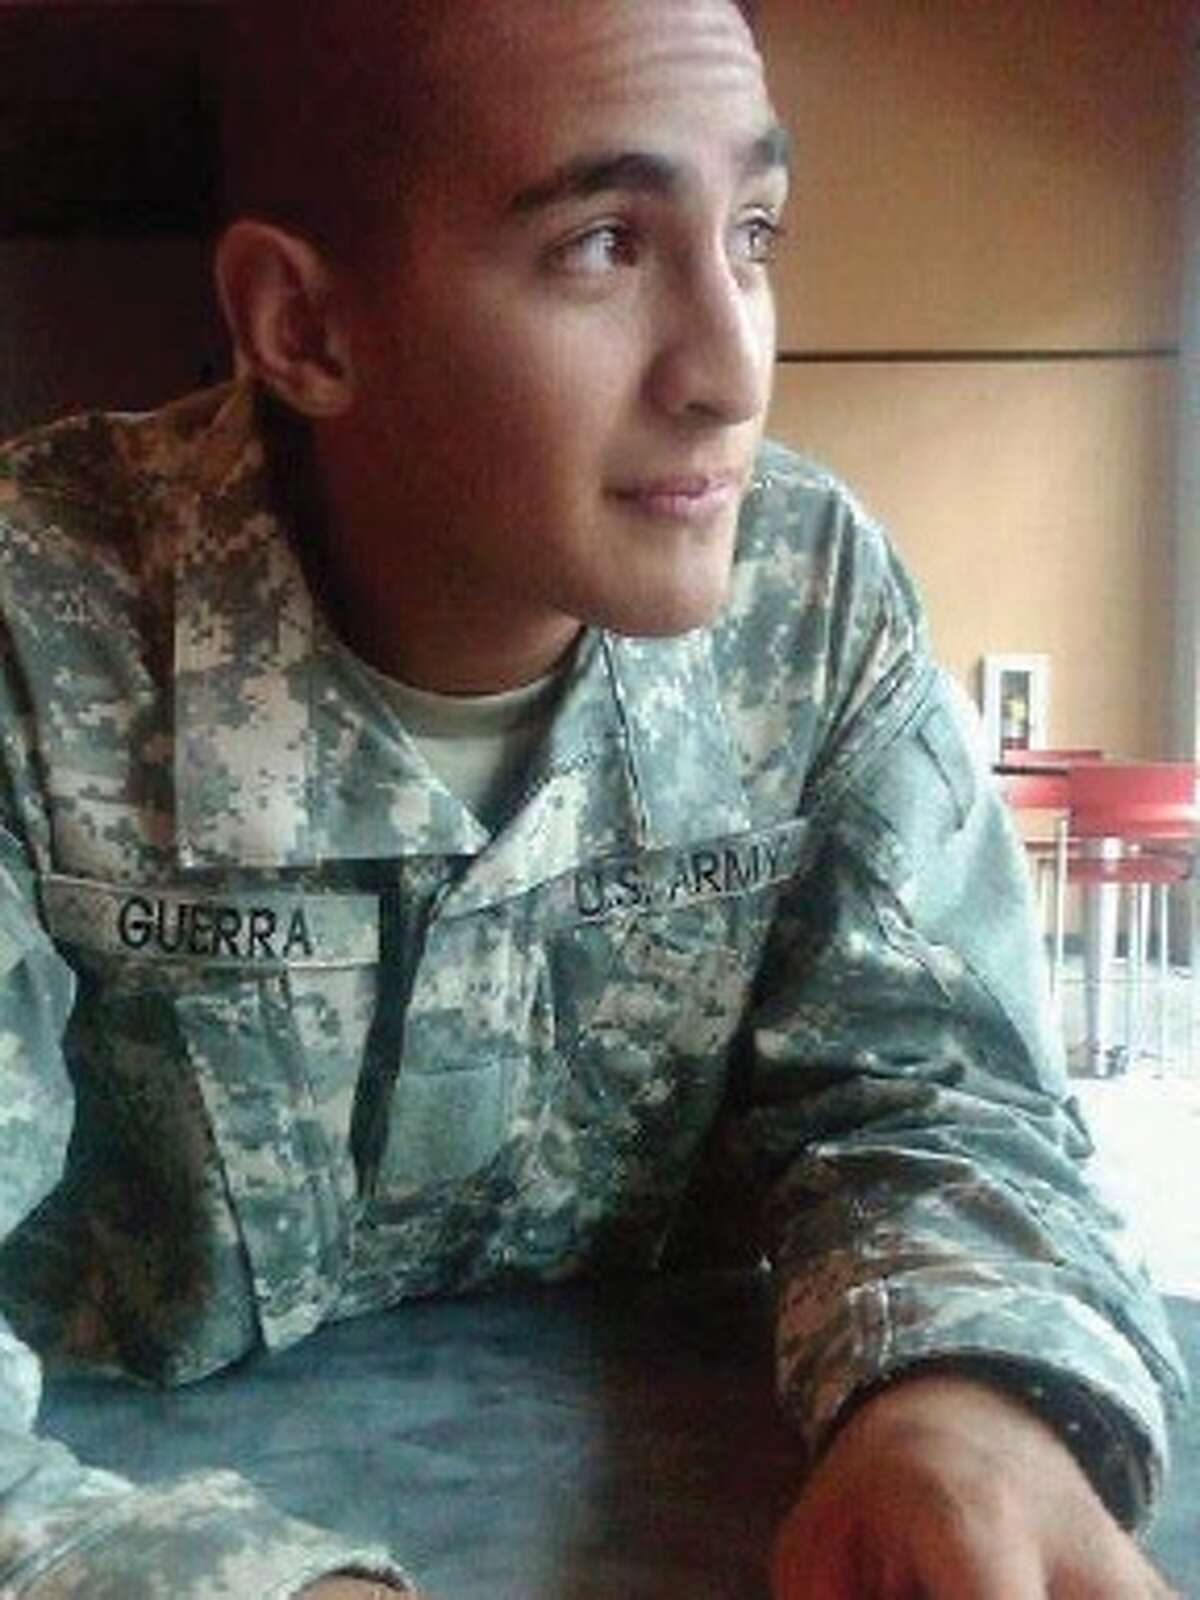 The custodial death report on Joe Guerra, who was killed by a deputy in 2012, was filed more than a year late.